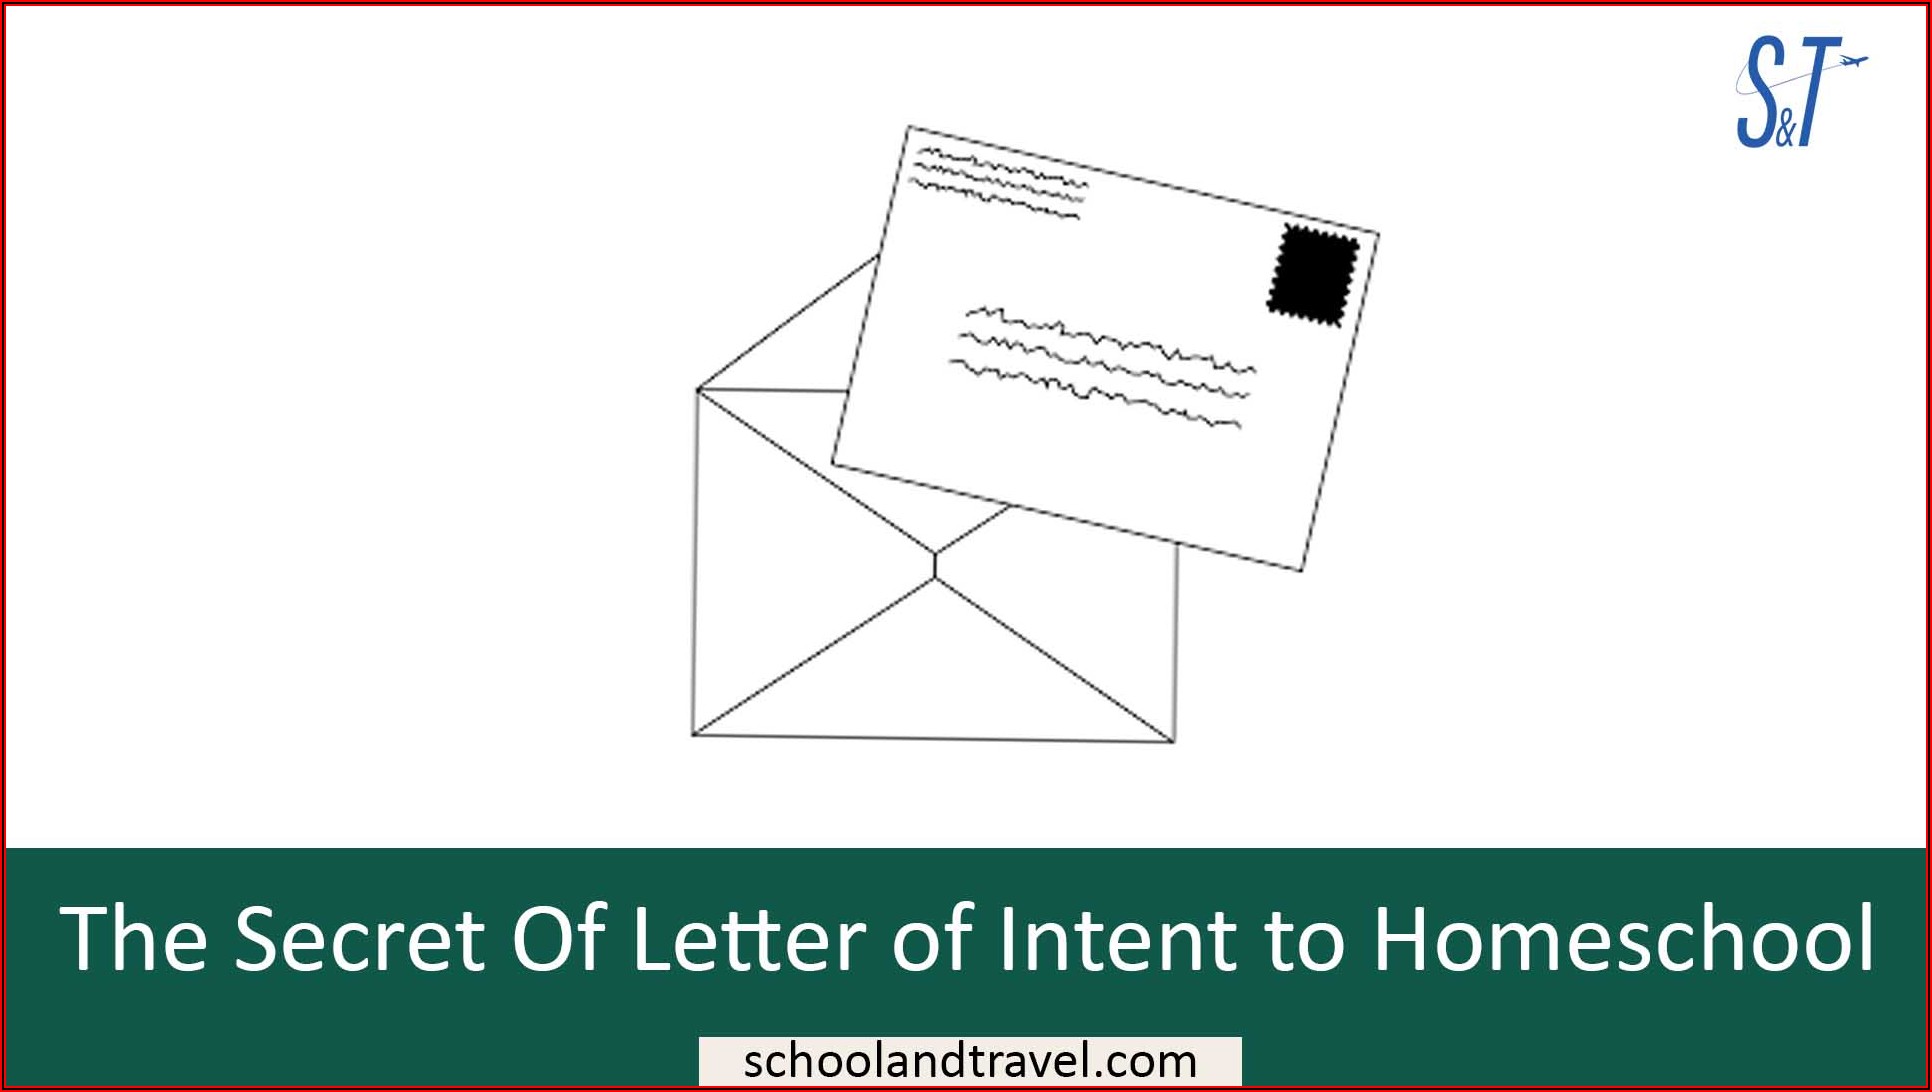 Letter Of Intent To Homeschool Mn